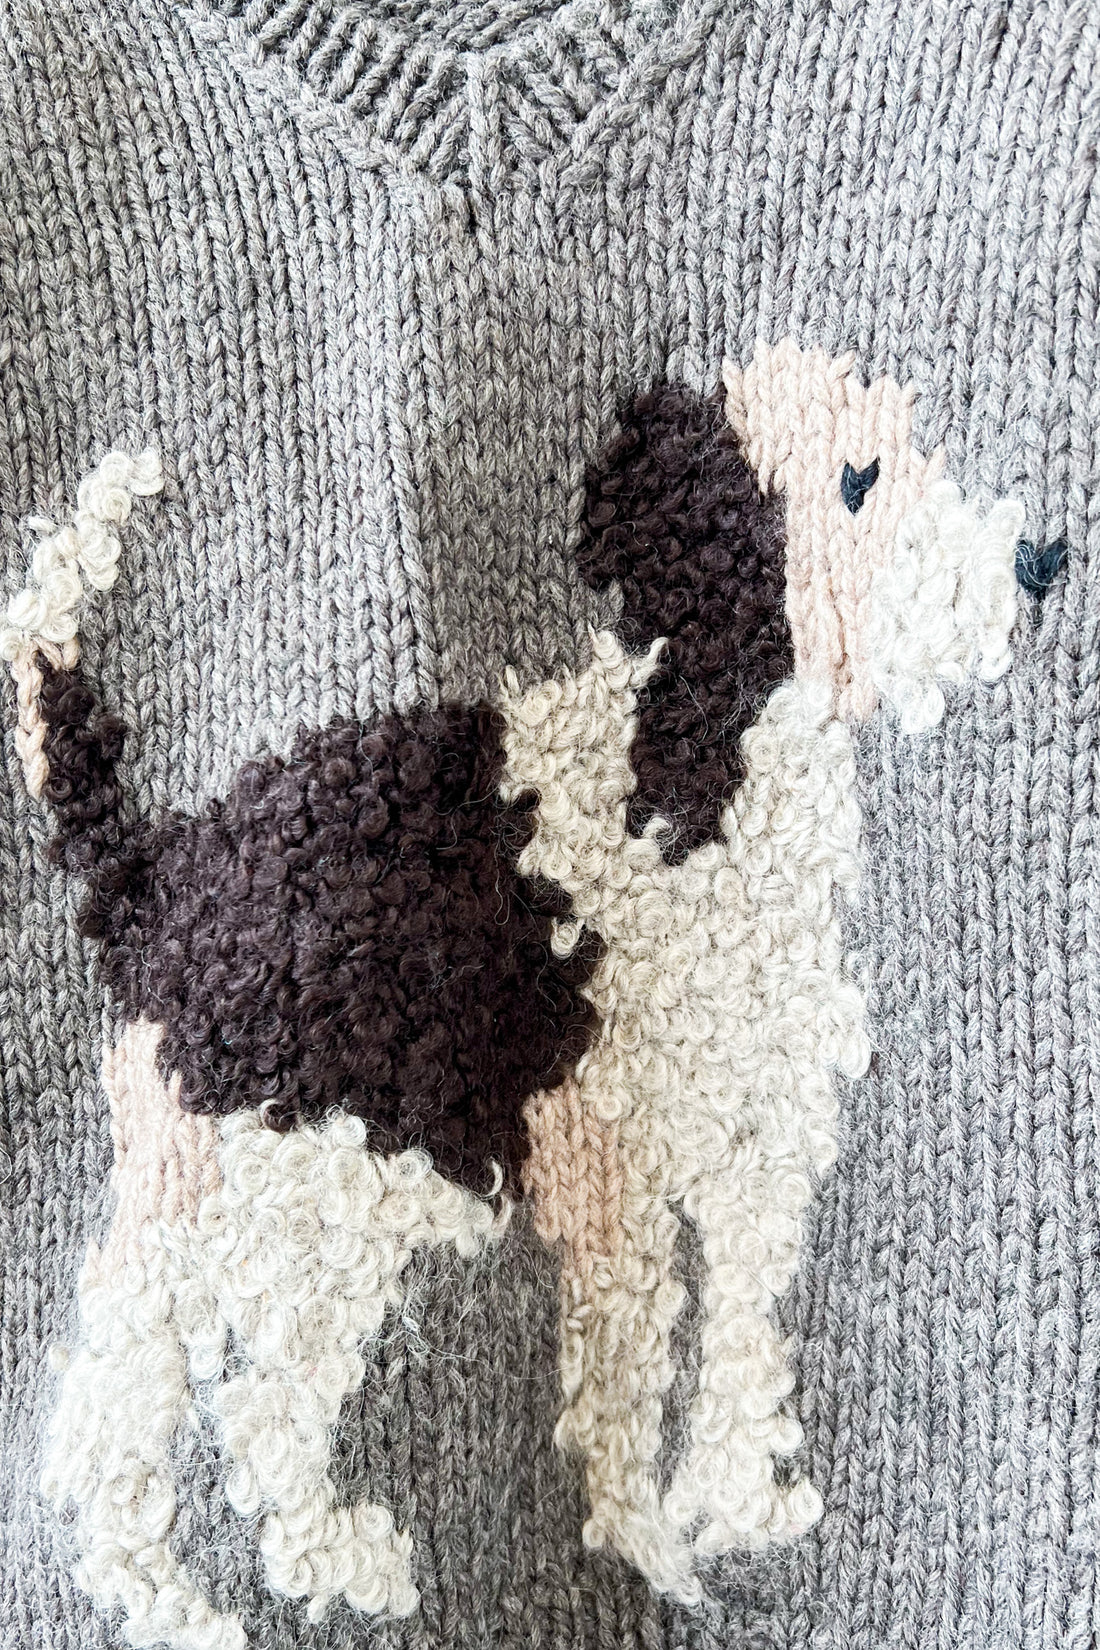 Vintage Tufted Doggy Knitted Jumper